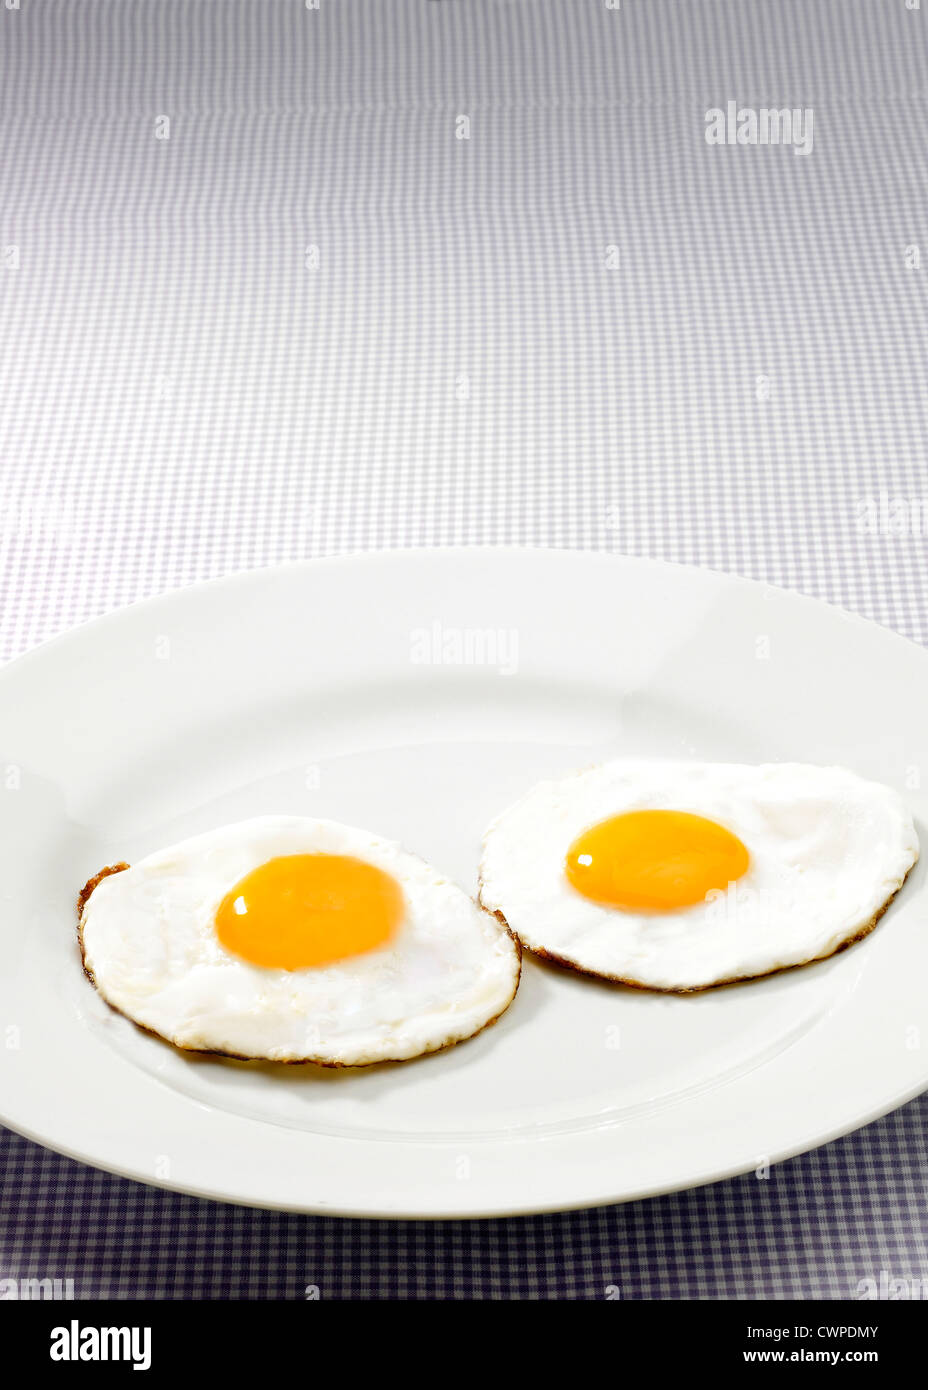 Two fried eggs with yellow yokes on white plate with gingham tablecloth Stock Photo